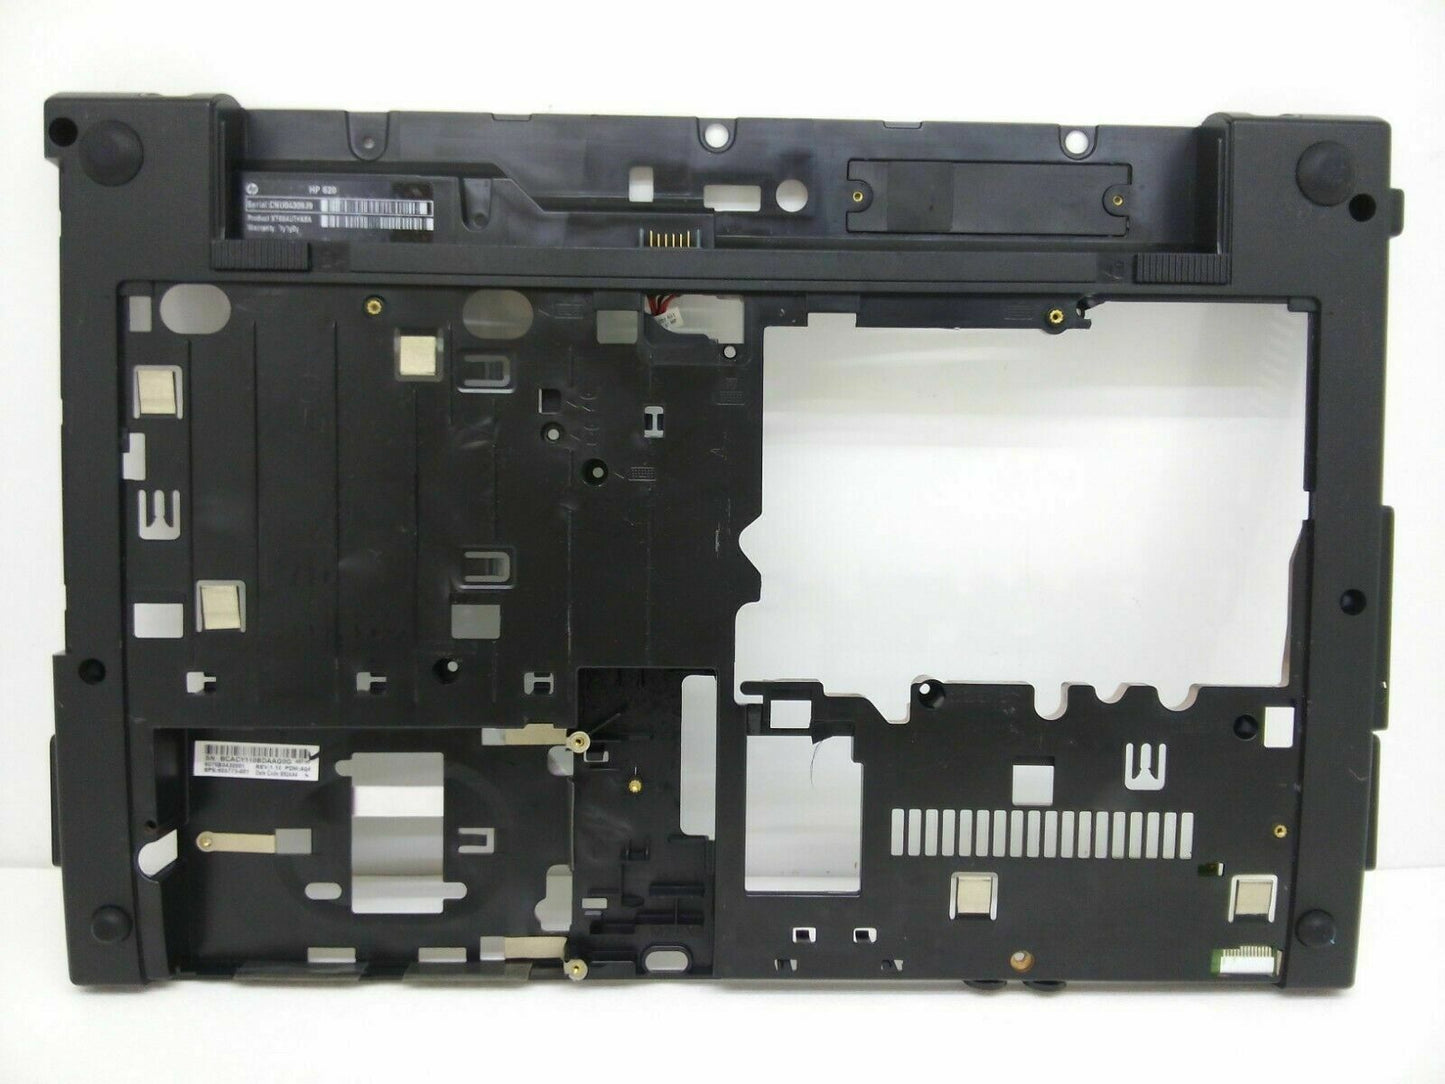 HP 625 TOP COVER